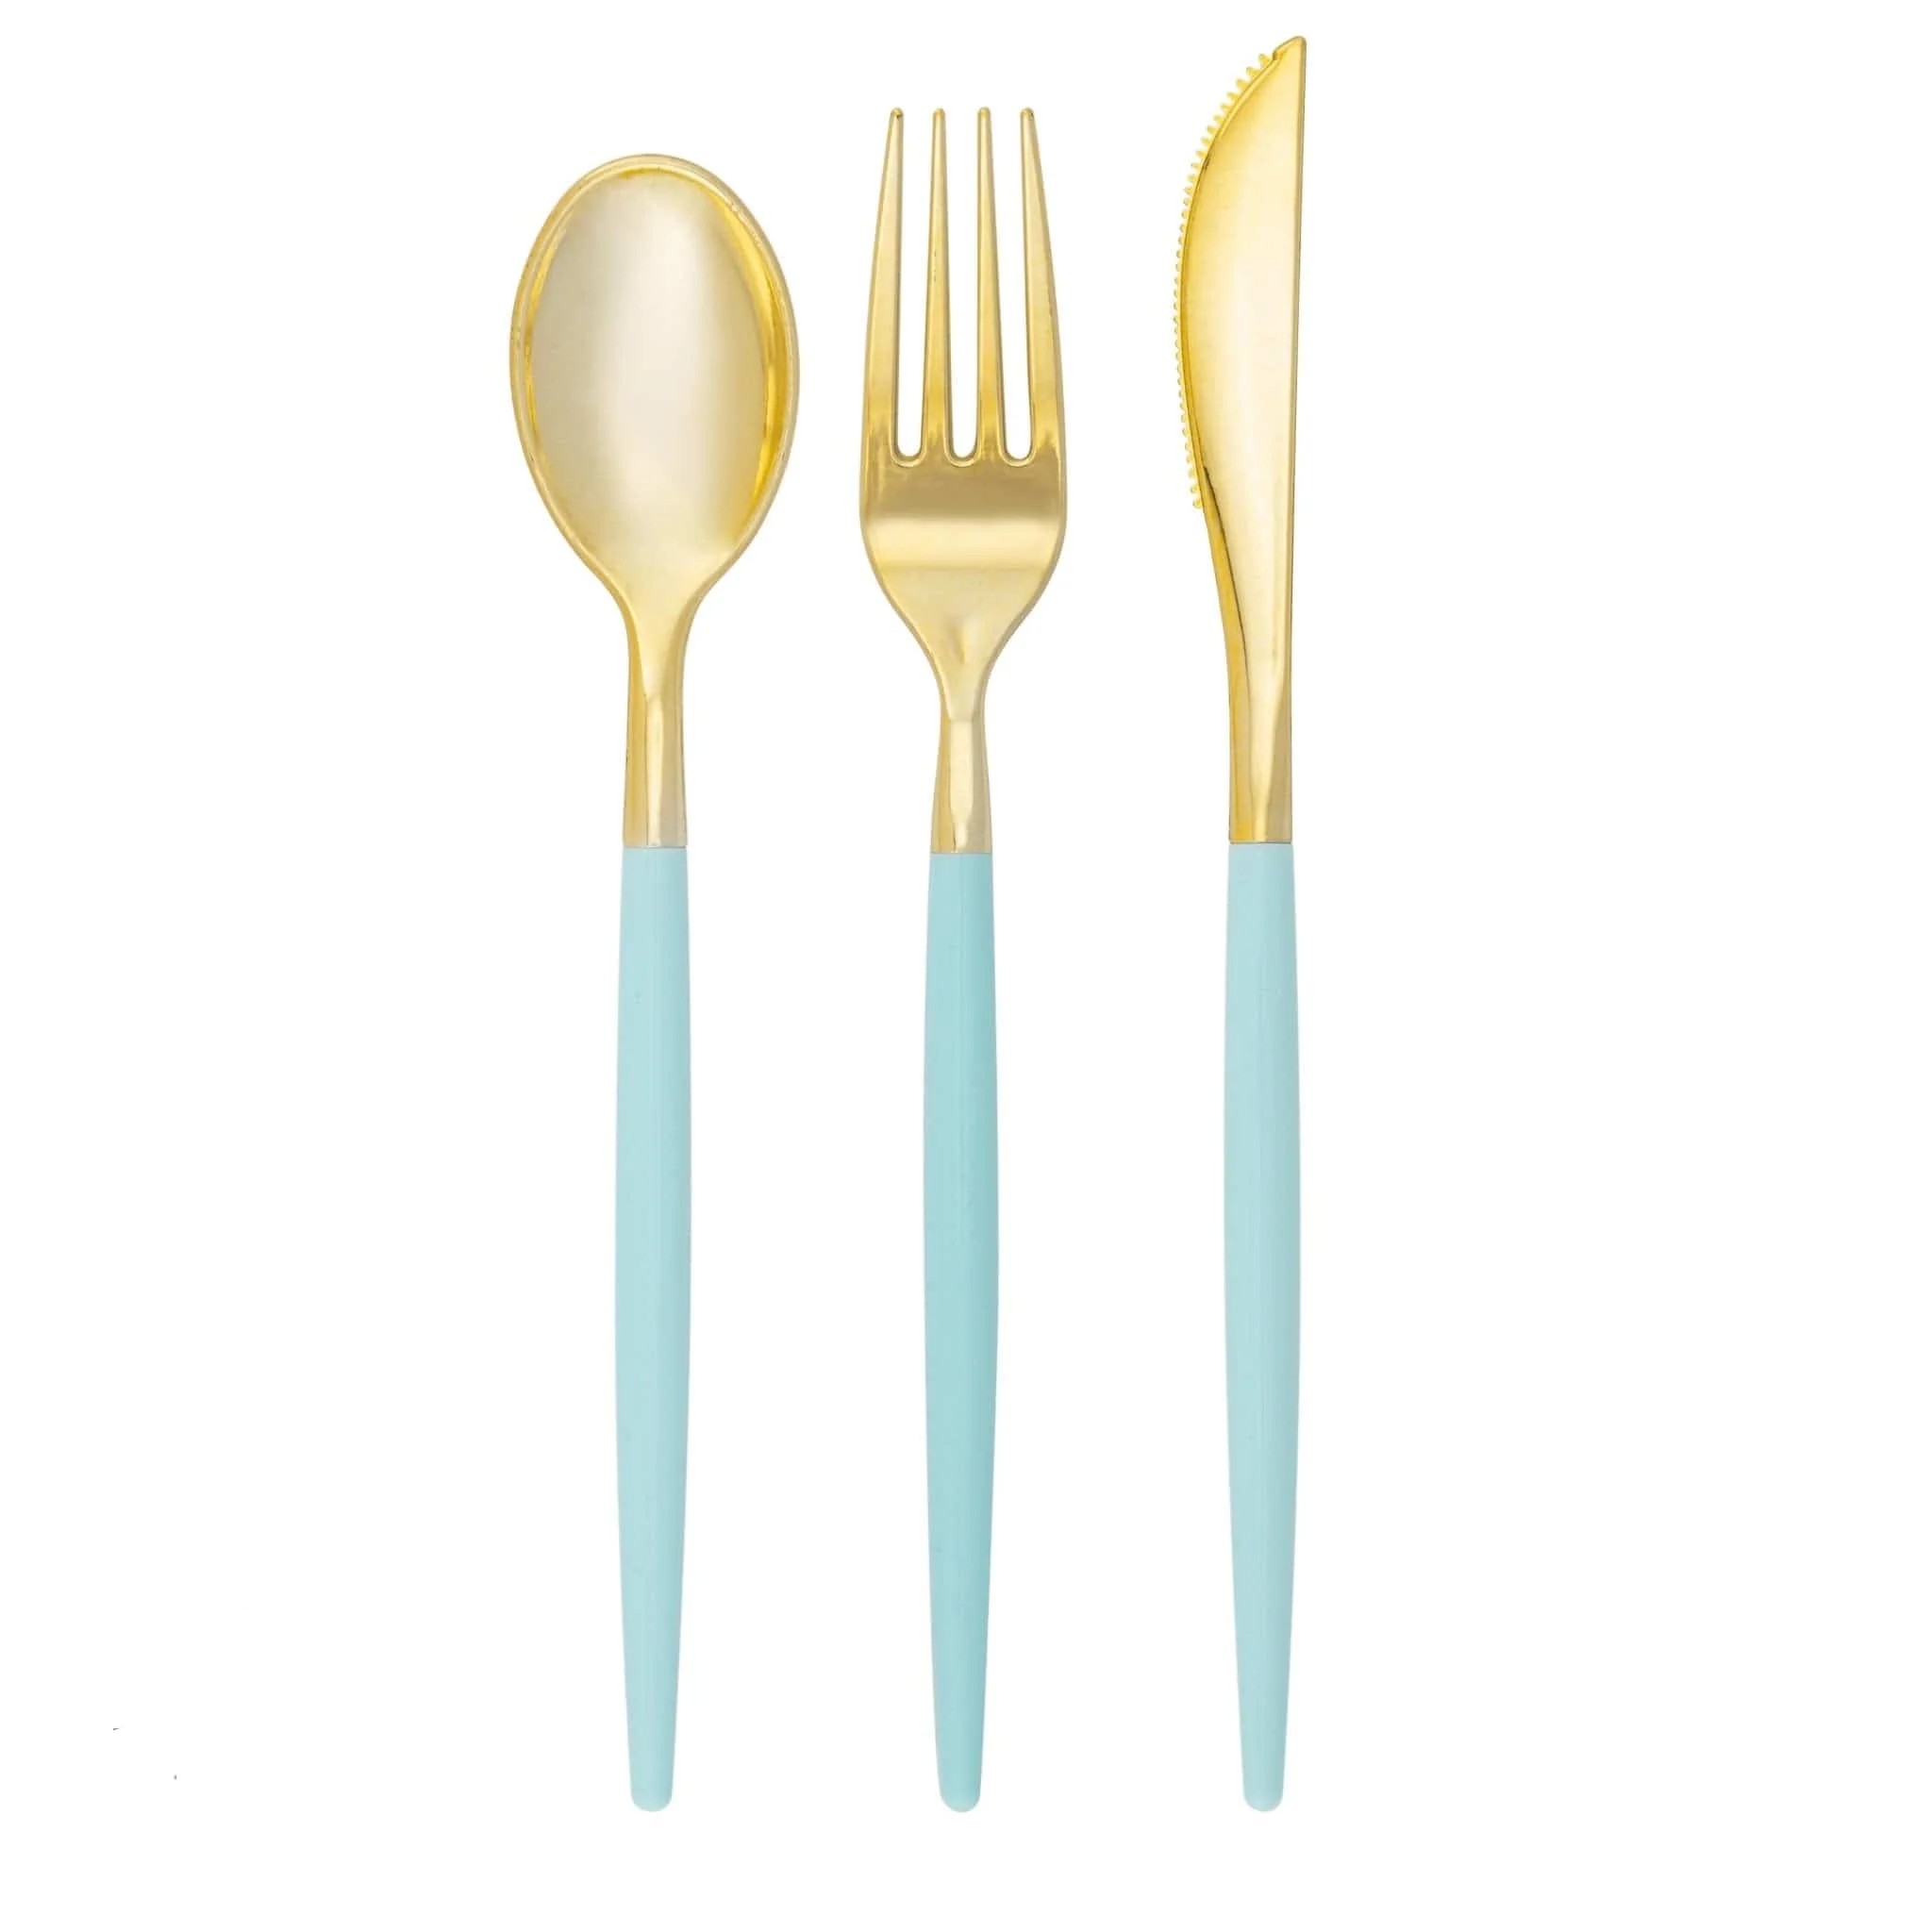 Luxe Party Mint and Gold Two Tone Plastic Cutlery Set - 32 pcs